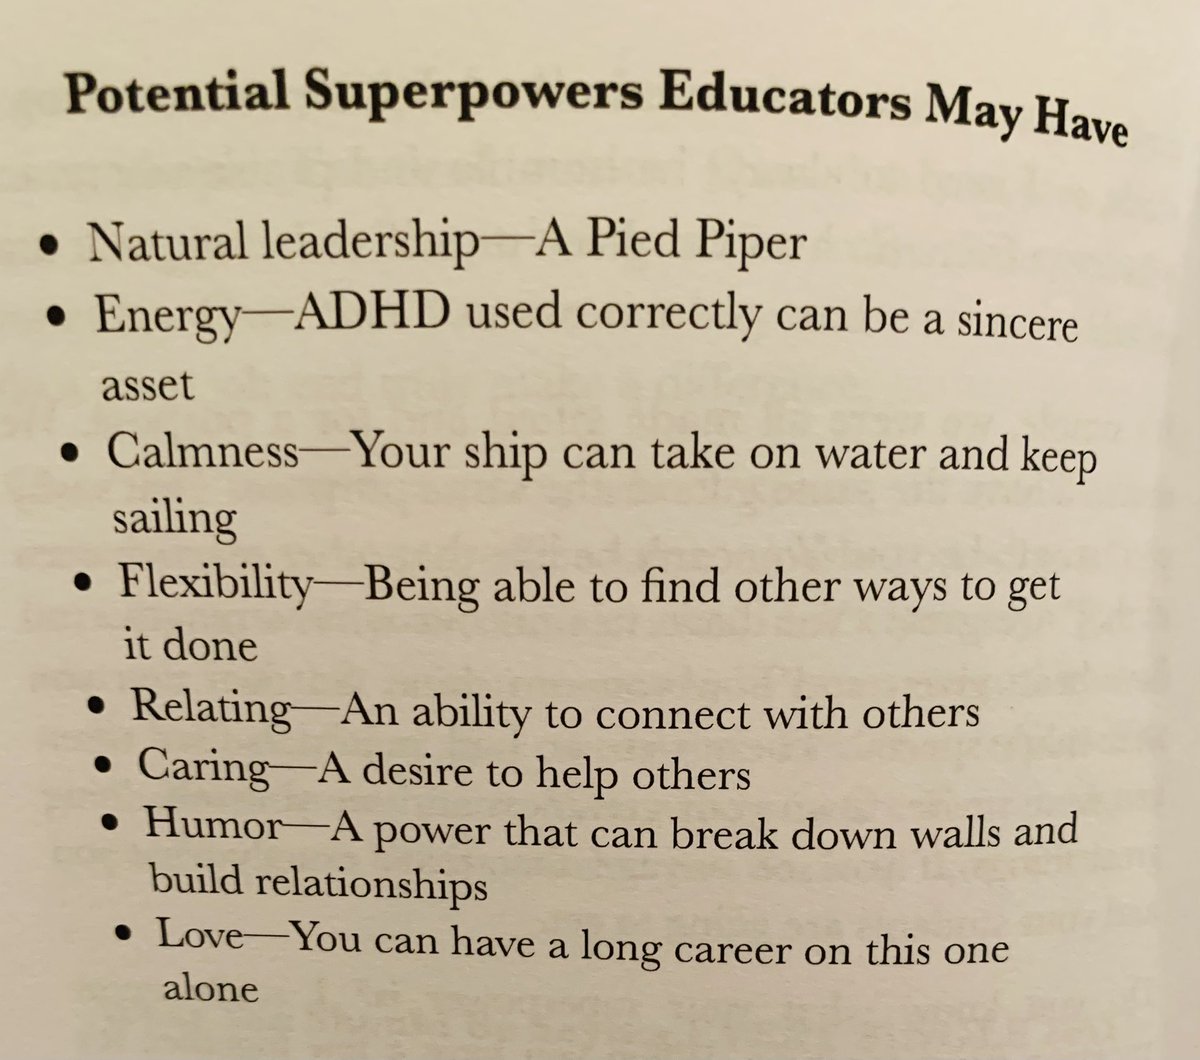 Teachers and Coaches: You have the gifts! To be good, you have to be you. What Trait do you already have that could be your SuperPower? #UseYourGifts